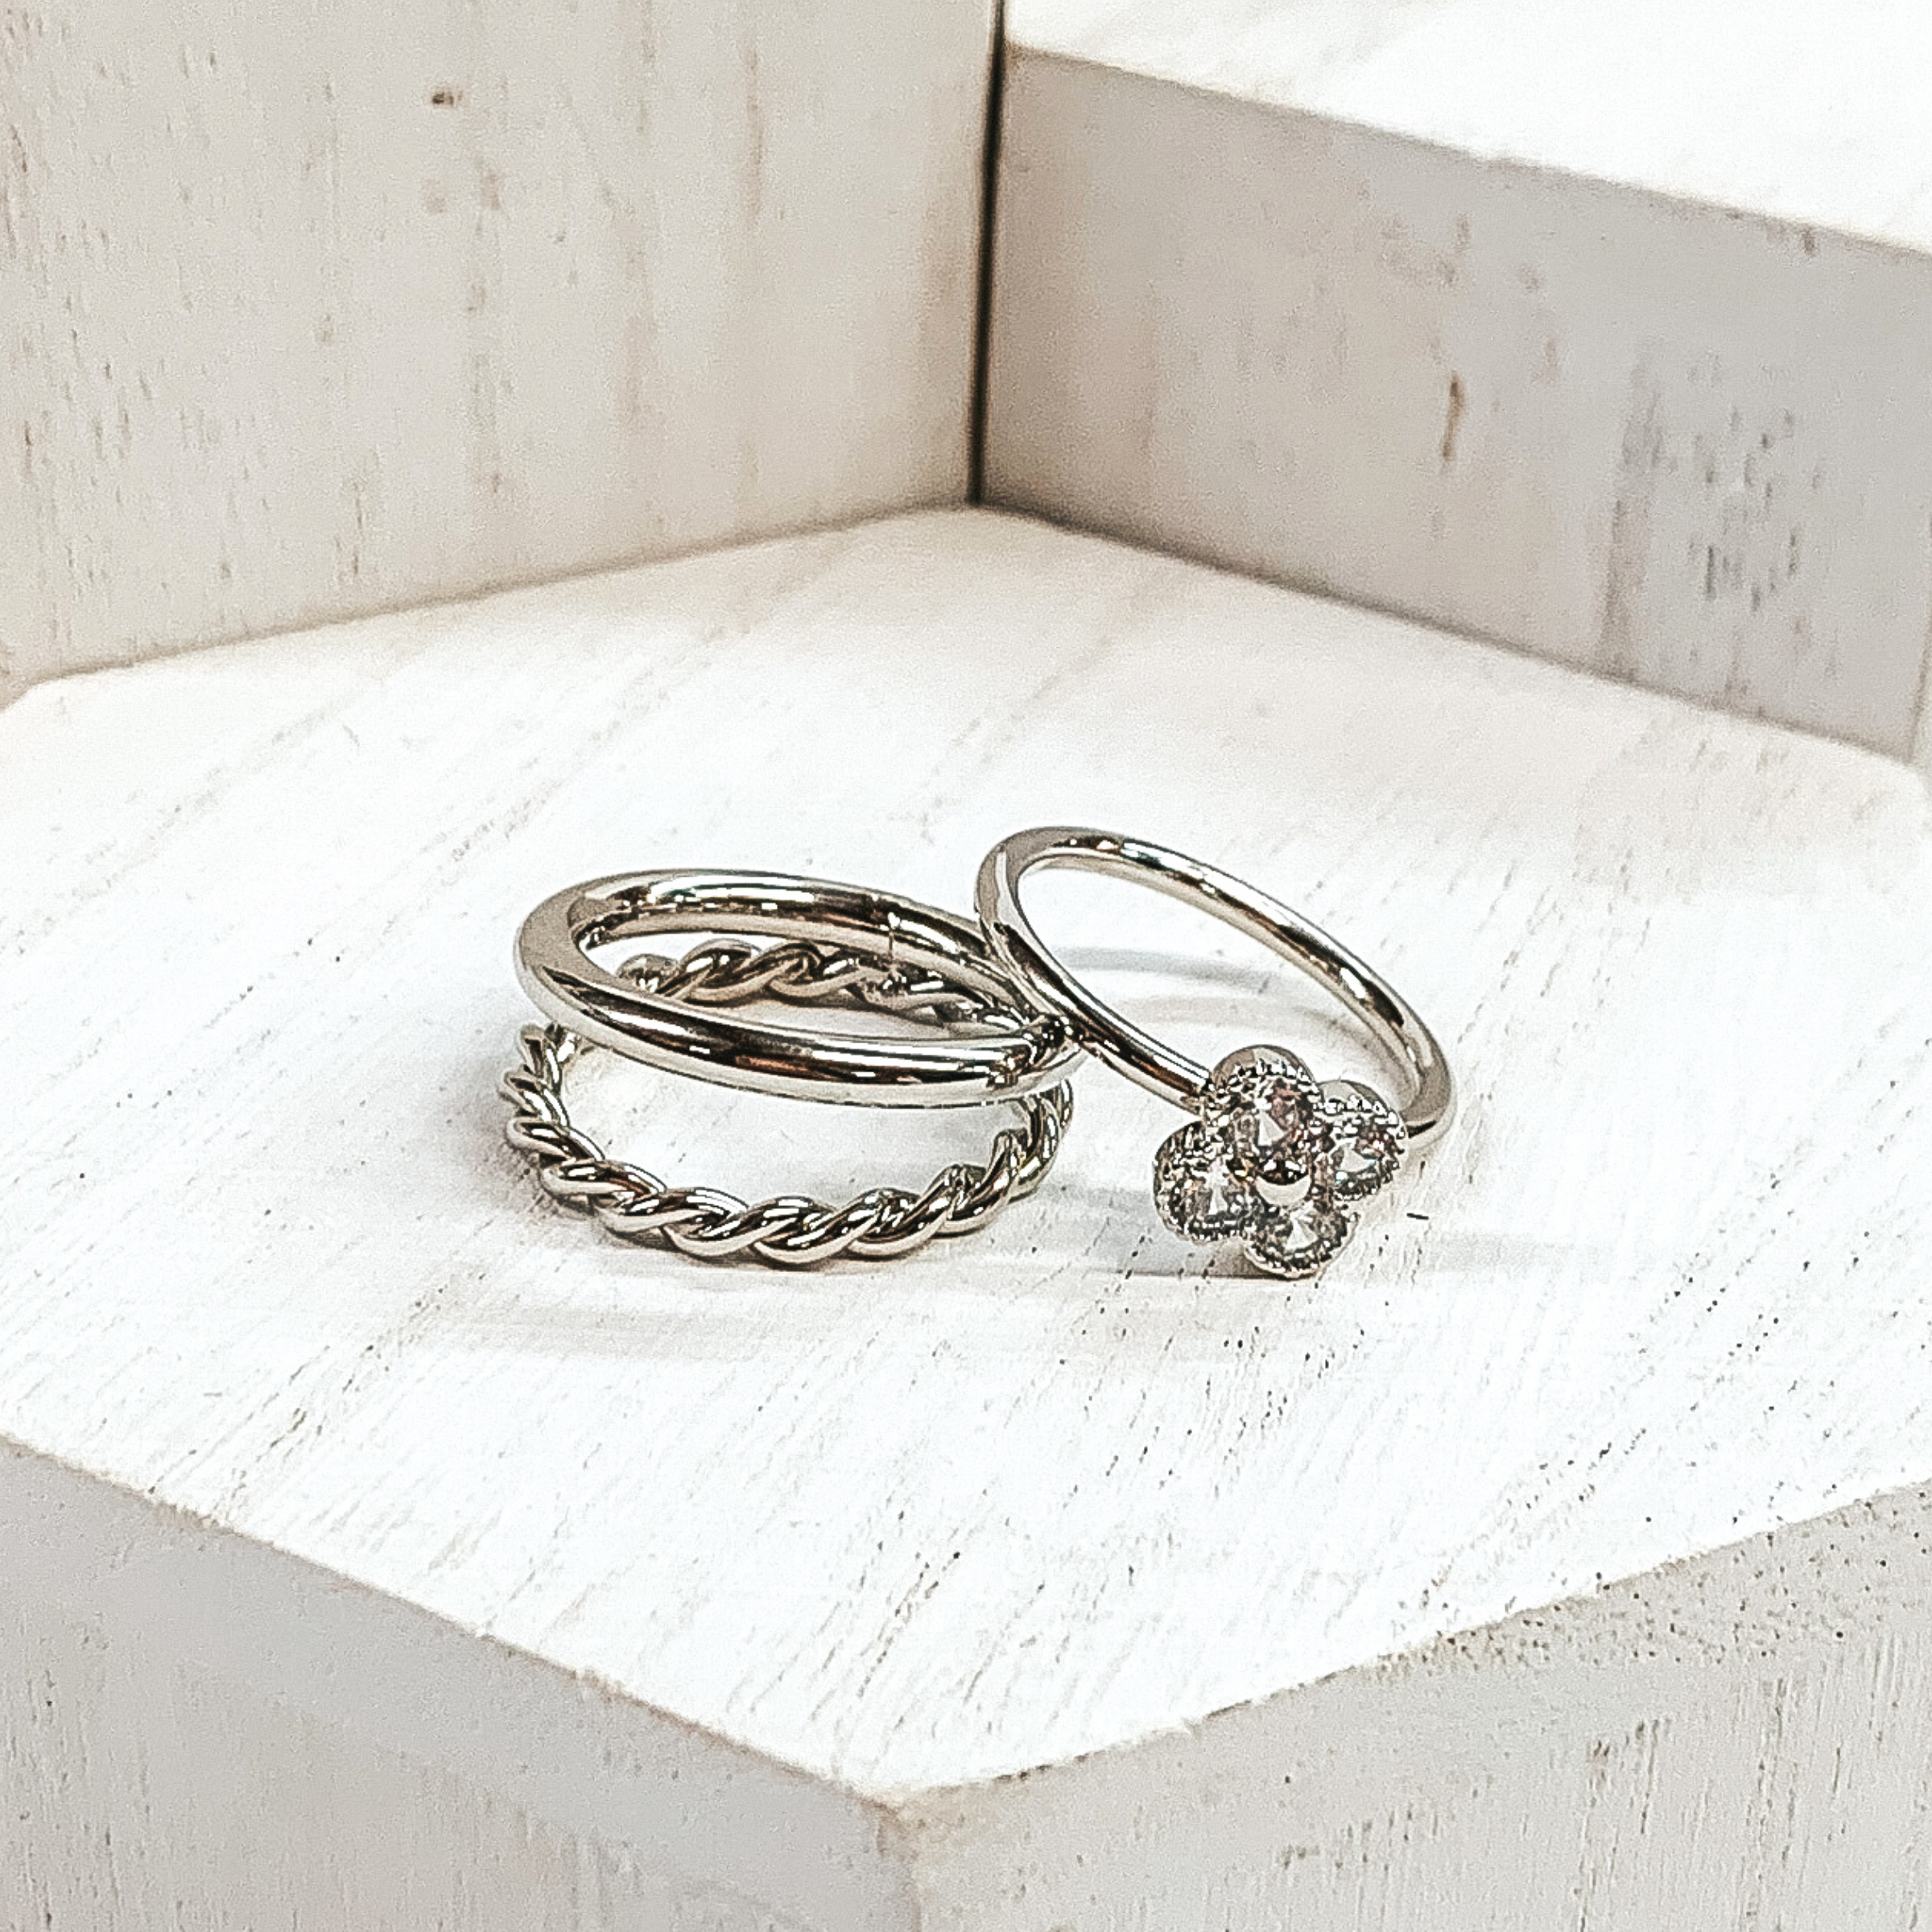 One ring is a silver, double stacked ring with a plain band and twisted band. The second rings is a plain band with a clover pendant that has clear crystals. These rings are pictured on white blocks. 